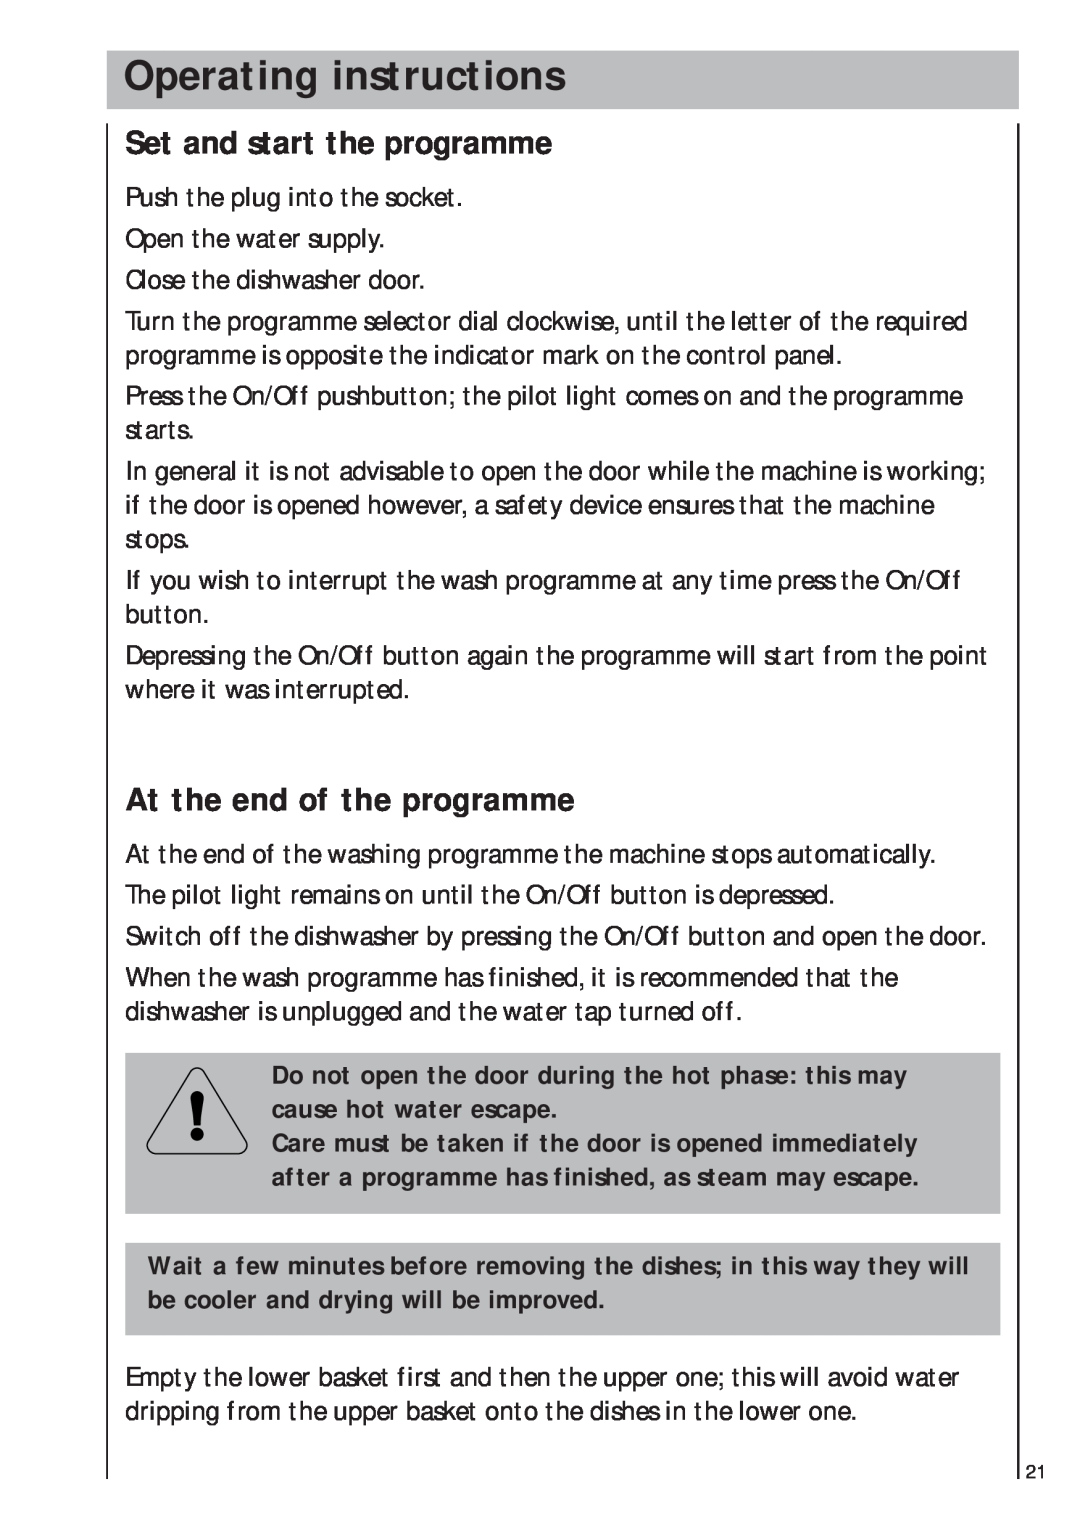 AEG 403 manual Operating instructions, Set and start the programme, At the end of the programme 